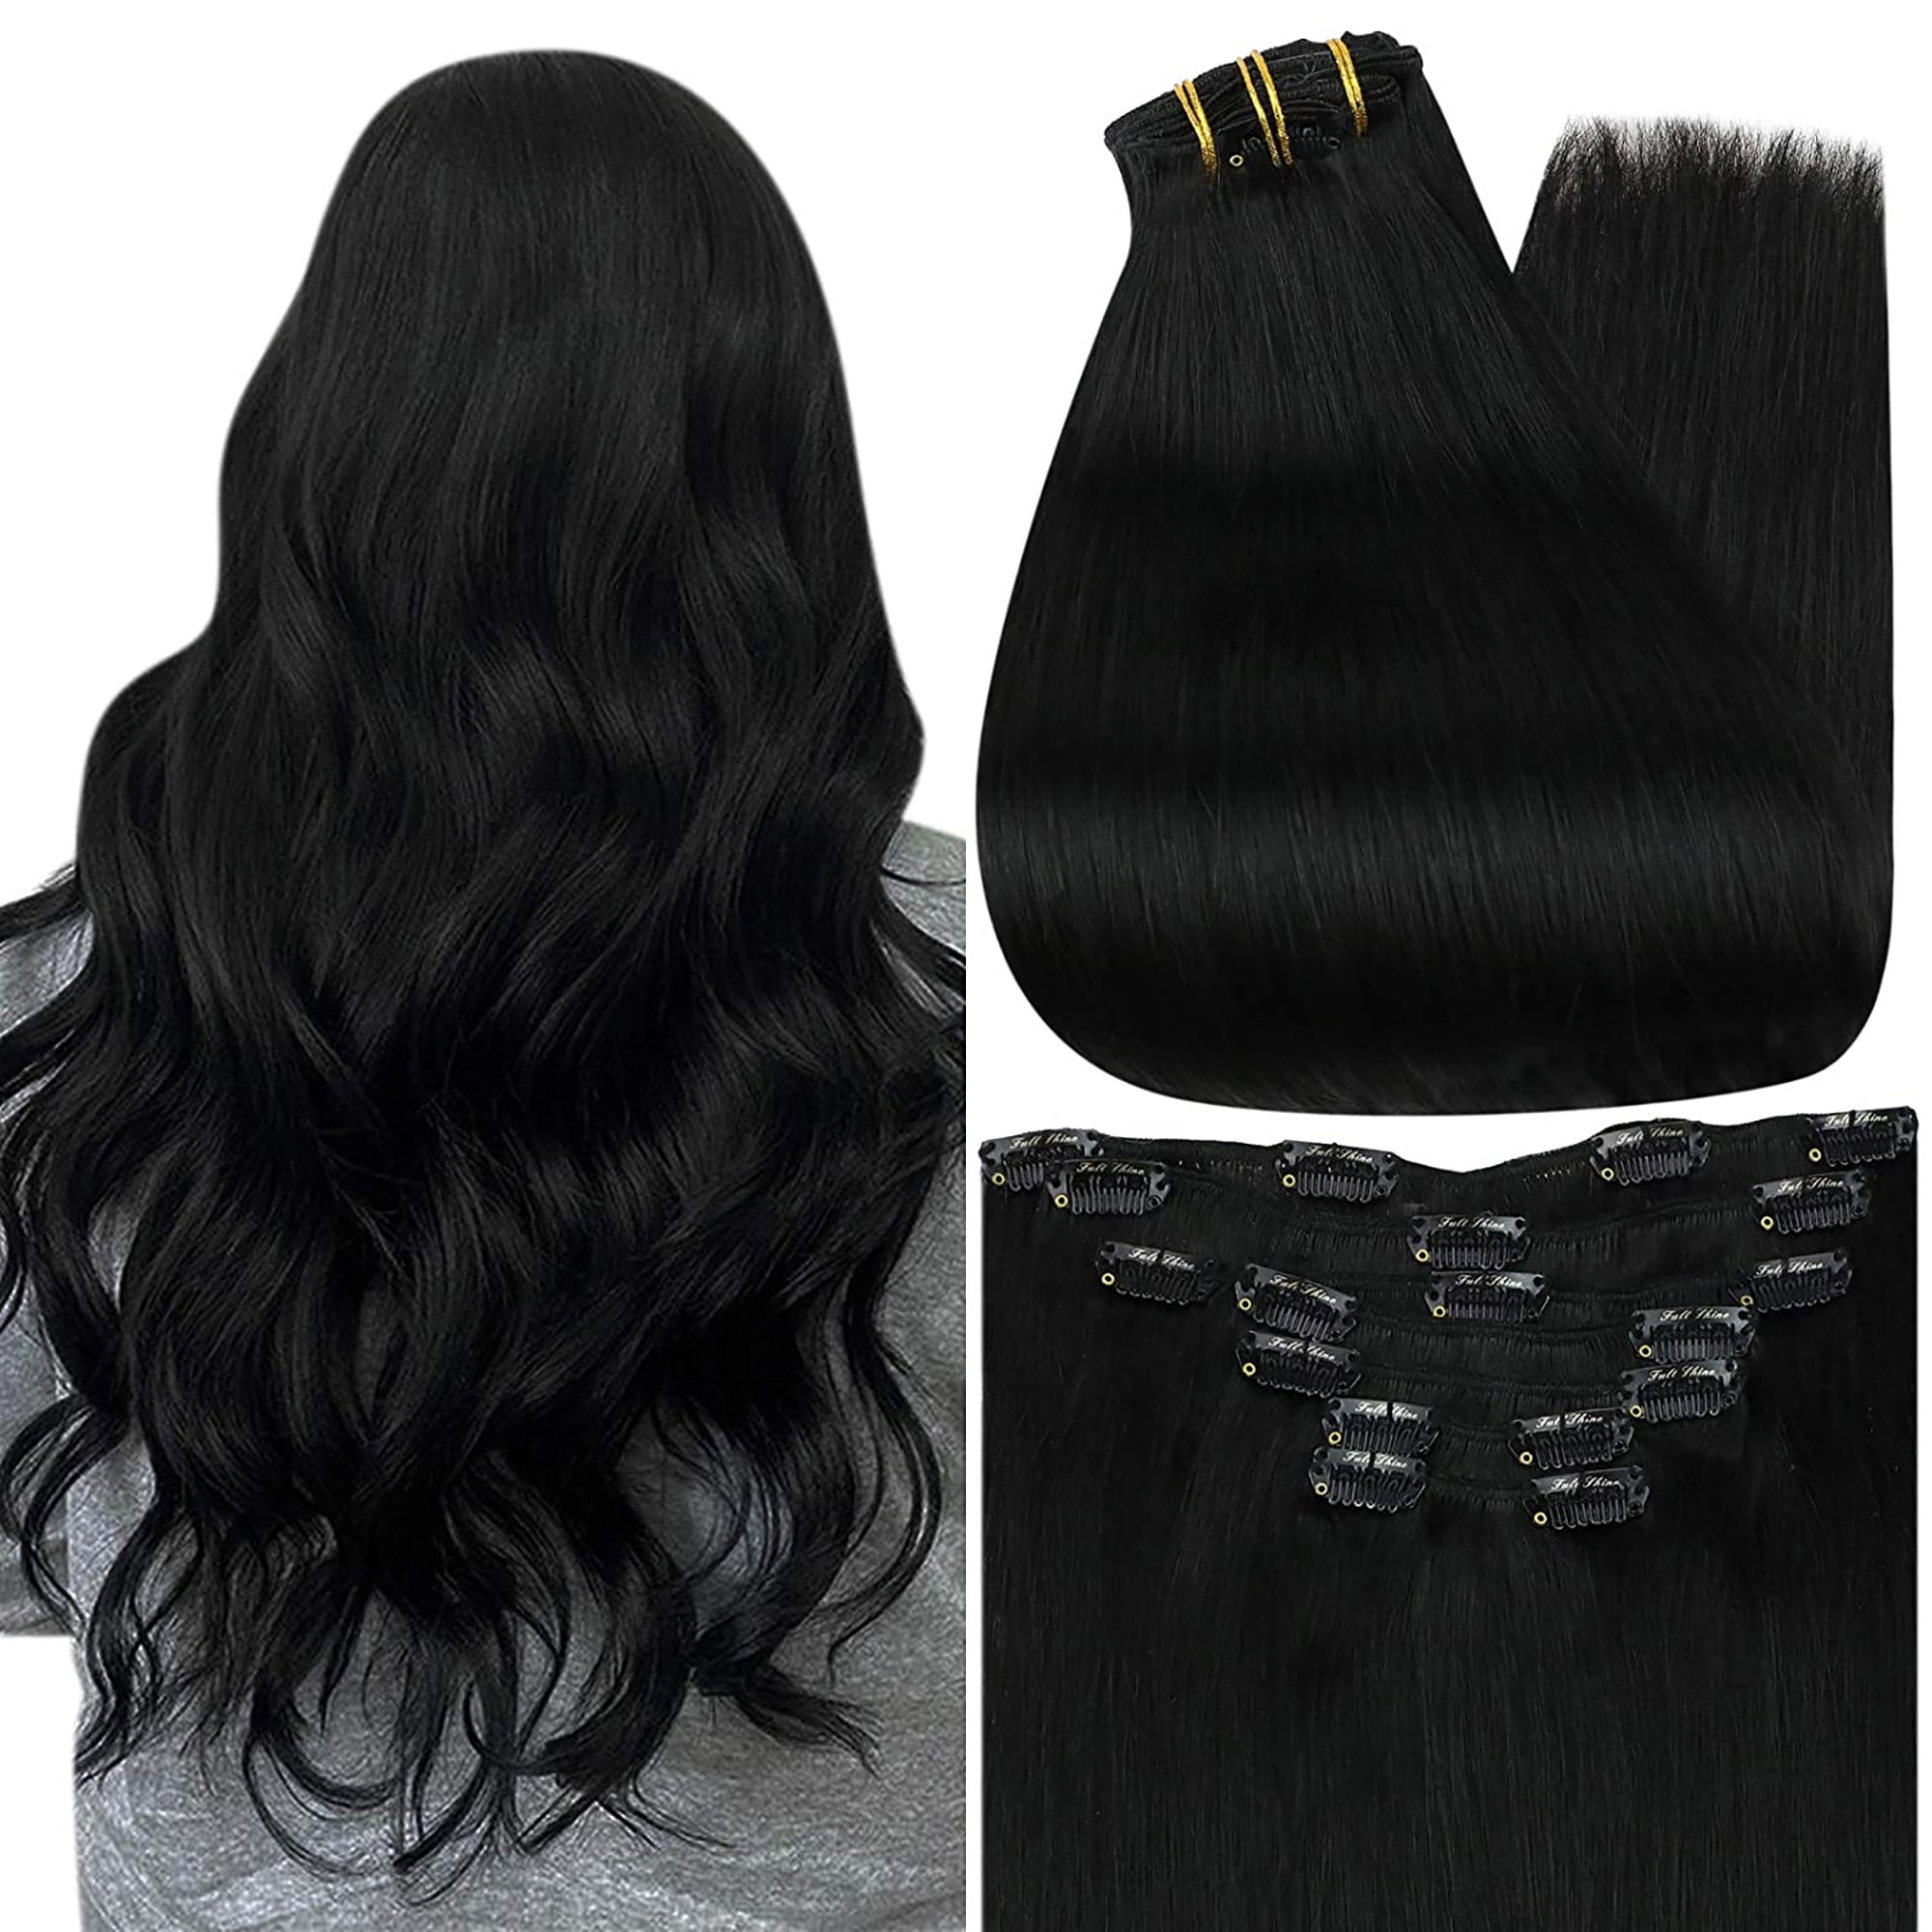 Clip in Hair Extensions Real Human Hair for Black Women 20 Inch #2 Dark  Brown Color Straight Remy Human Hair Extensions 100% Unprocessed Full Head  7